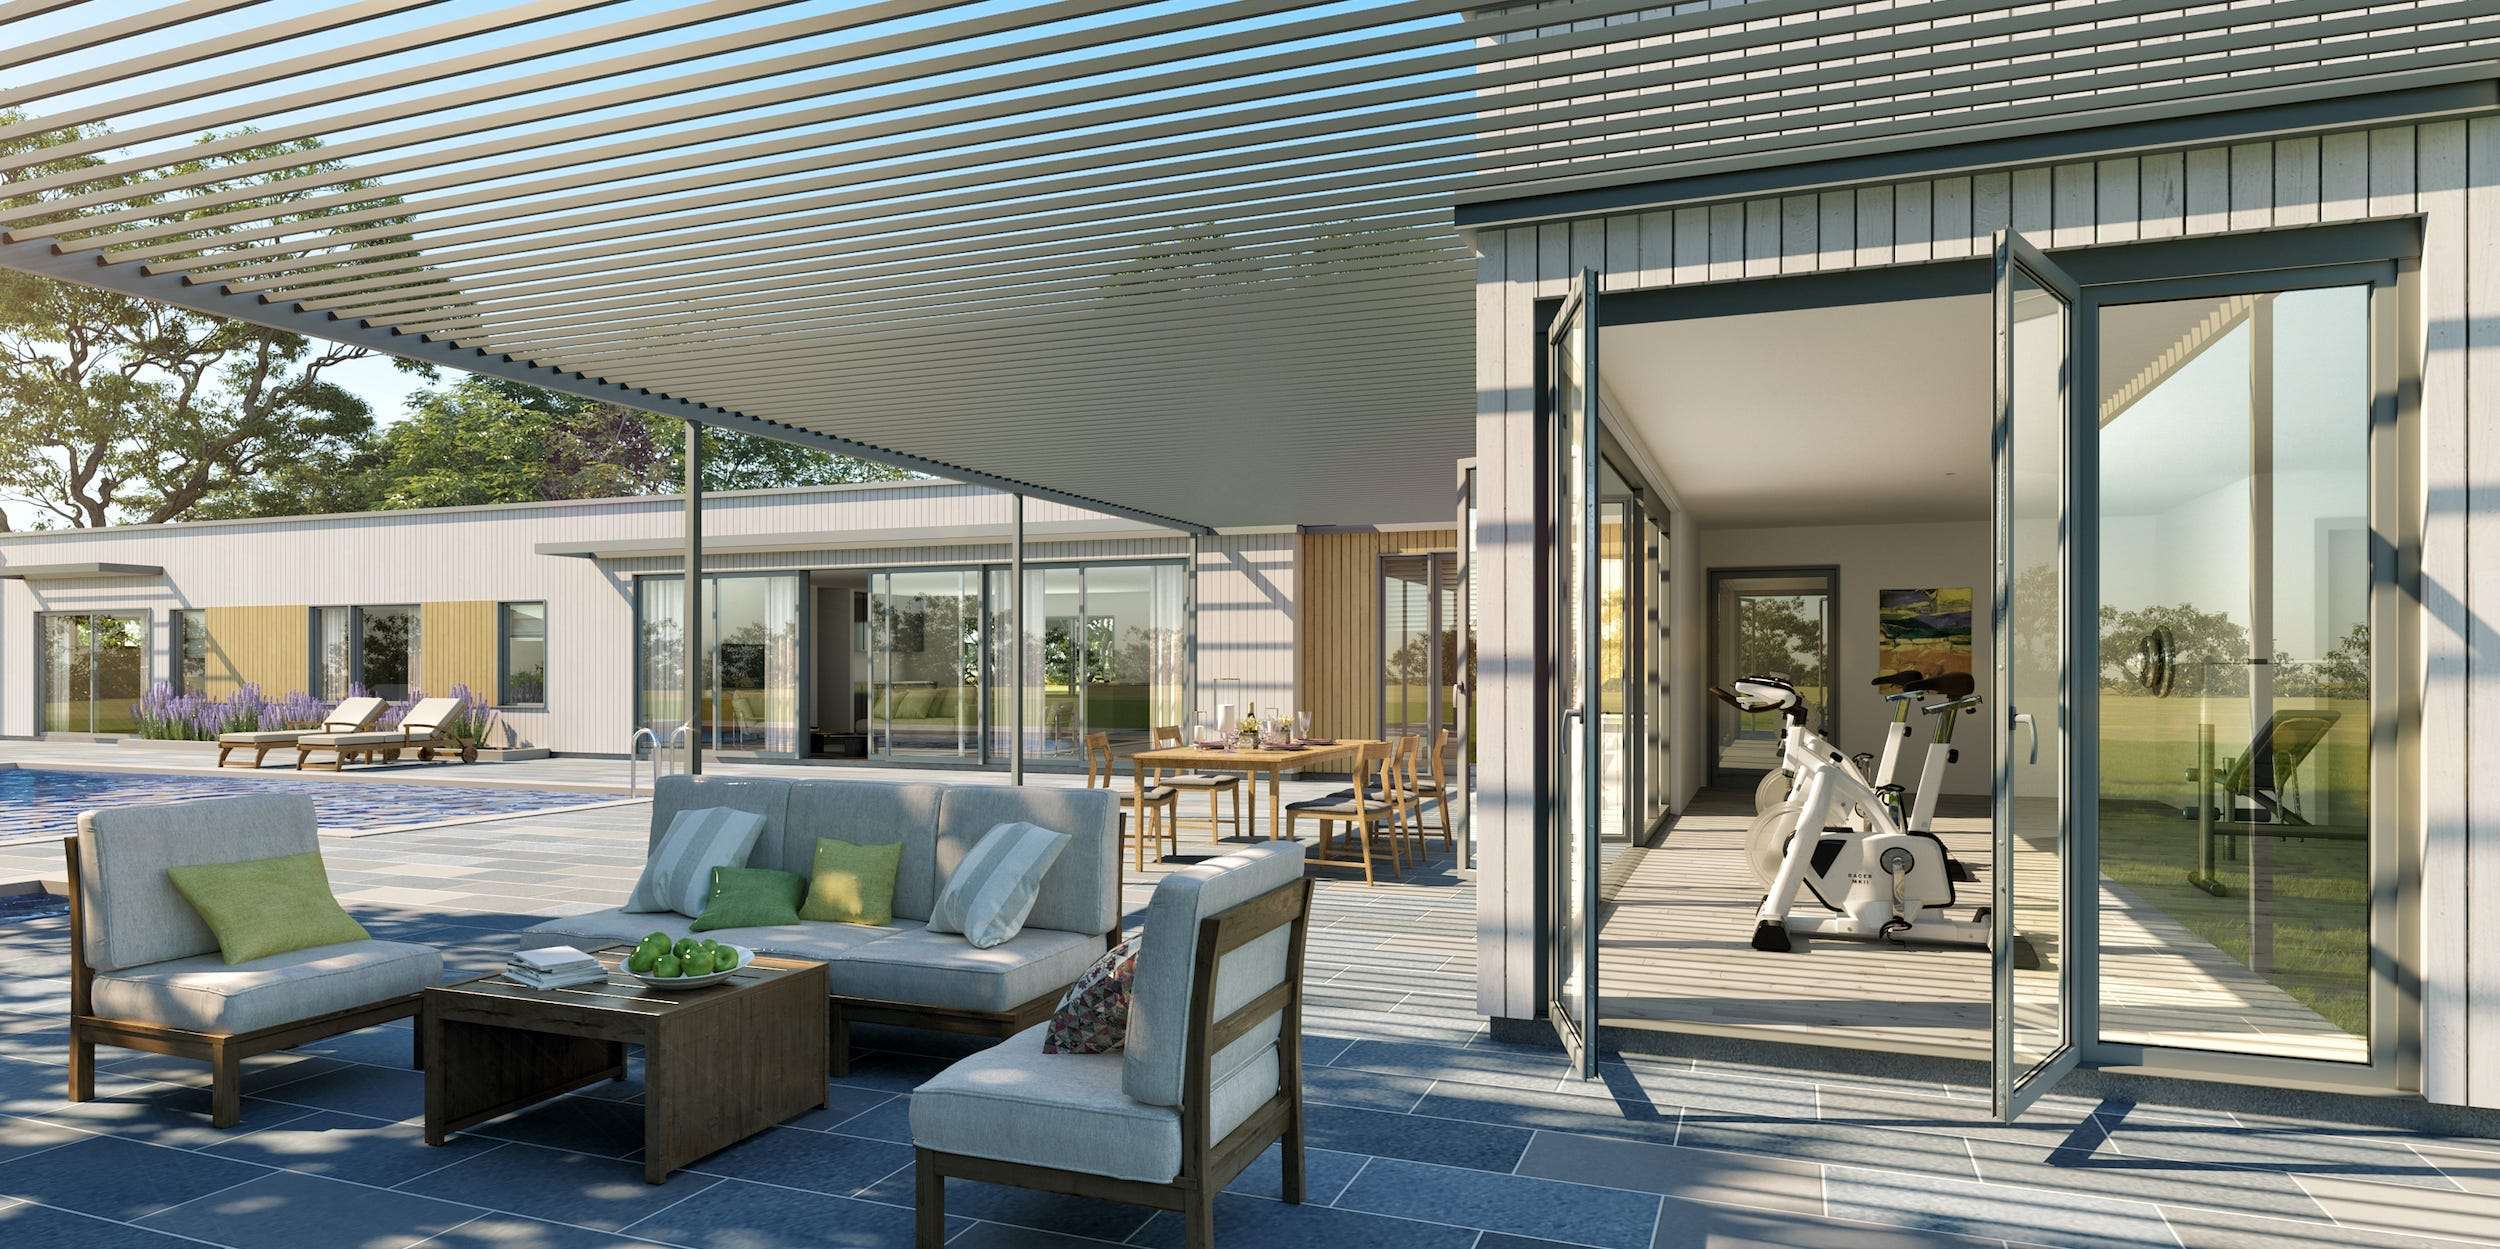 A company that makes $600,000 prefab smart homes got so popular in 2020 it had to turn away customers  - see inside its 3 new homes